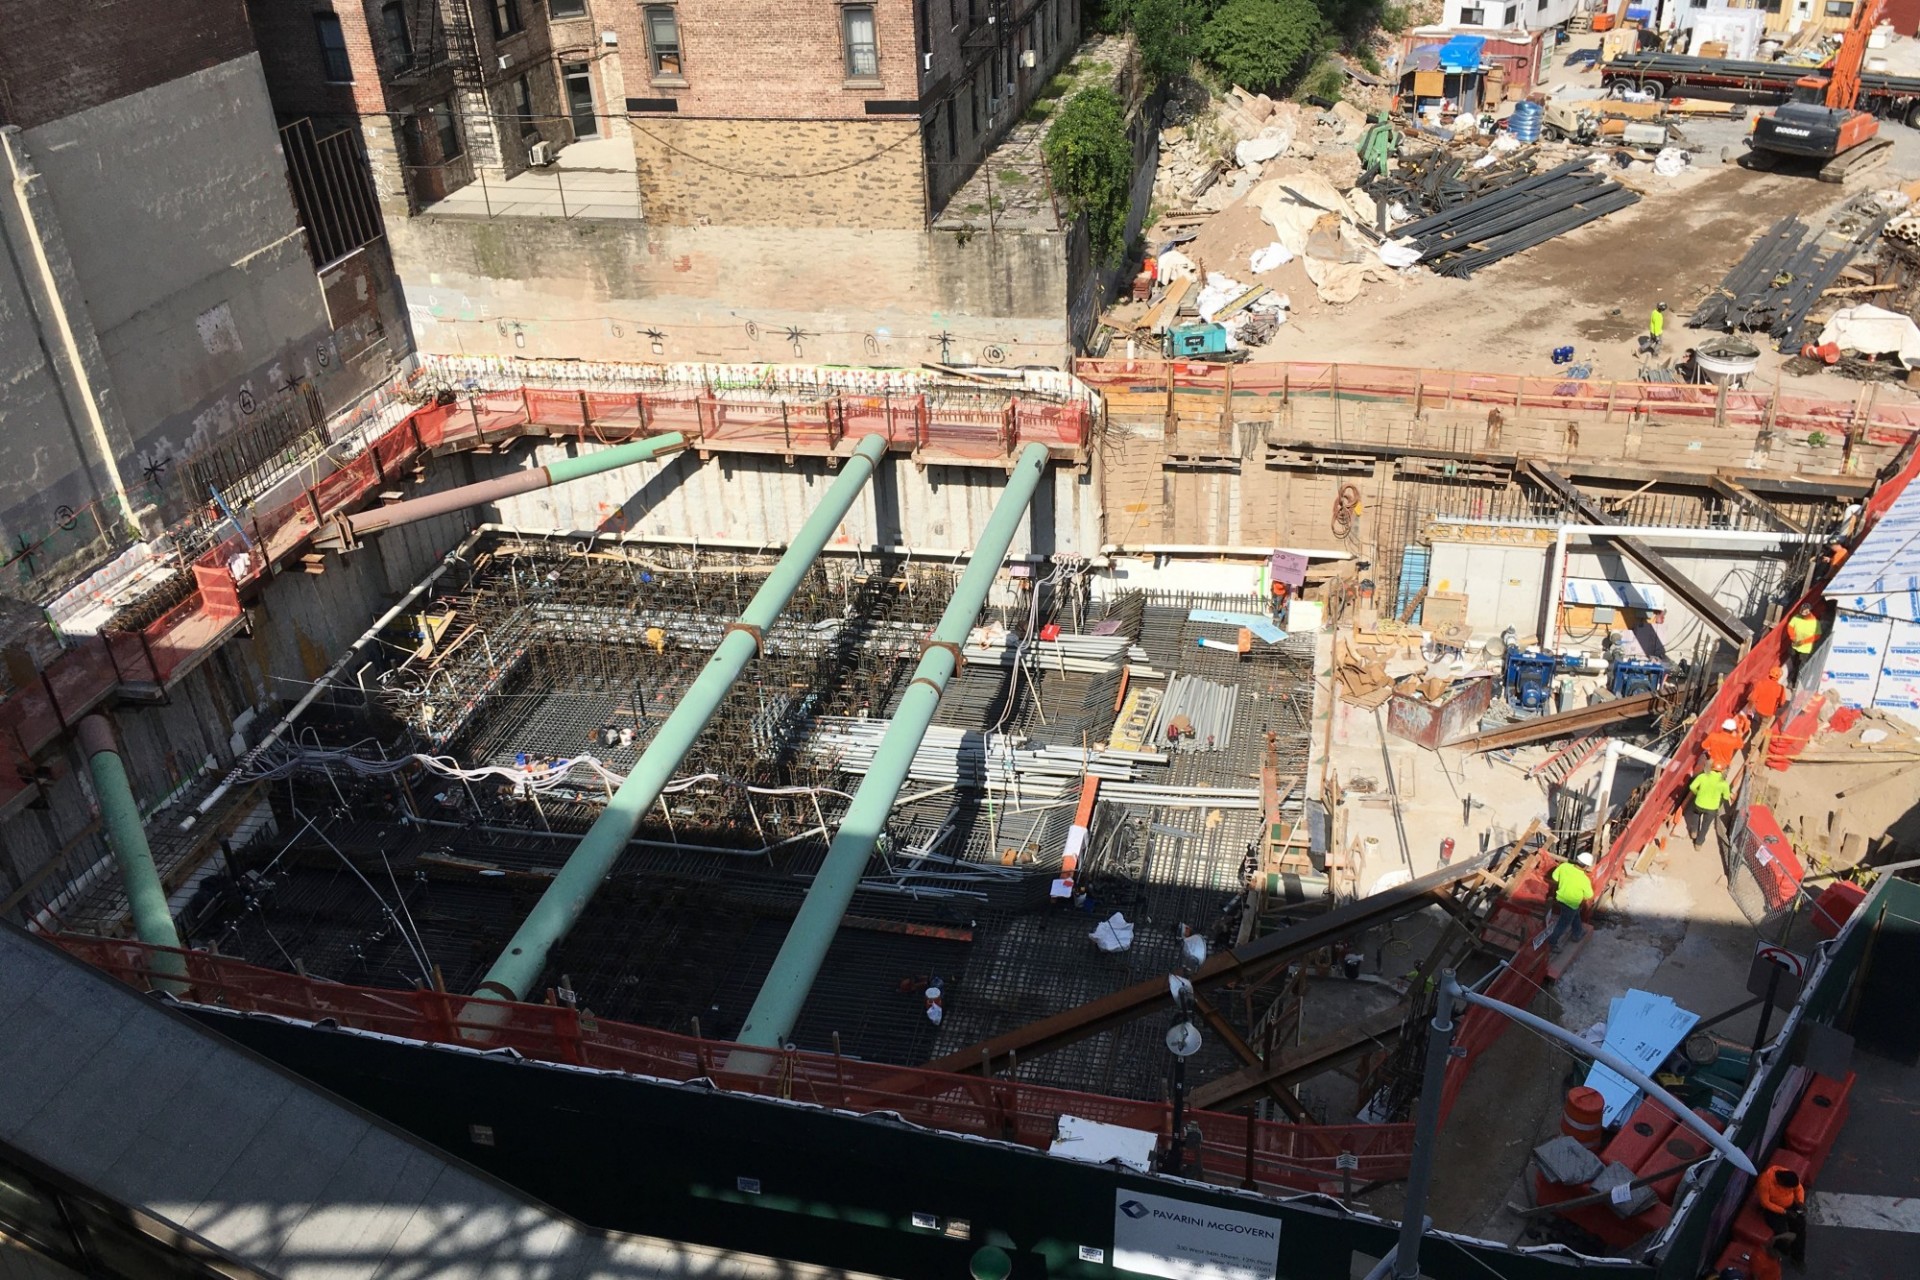 An aerial view of the 600 W. 125th Street construction site, with rebar covering half of the site, green pipes overhead, and equipment on the other half to perform foundation work. 